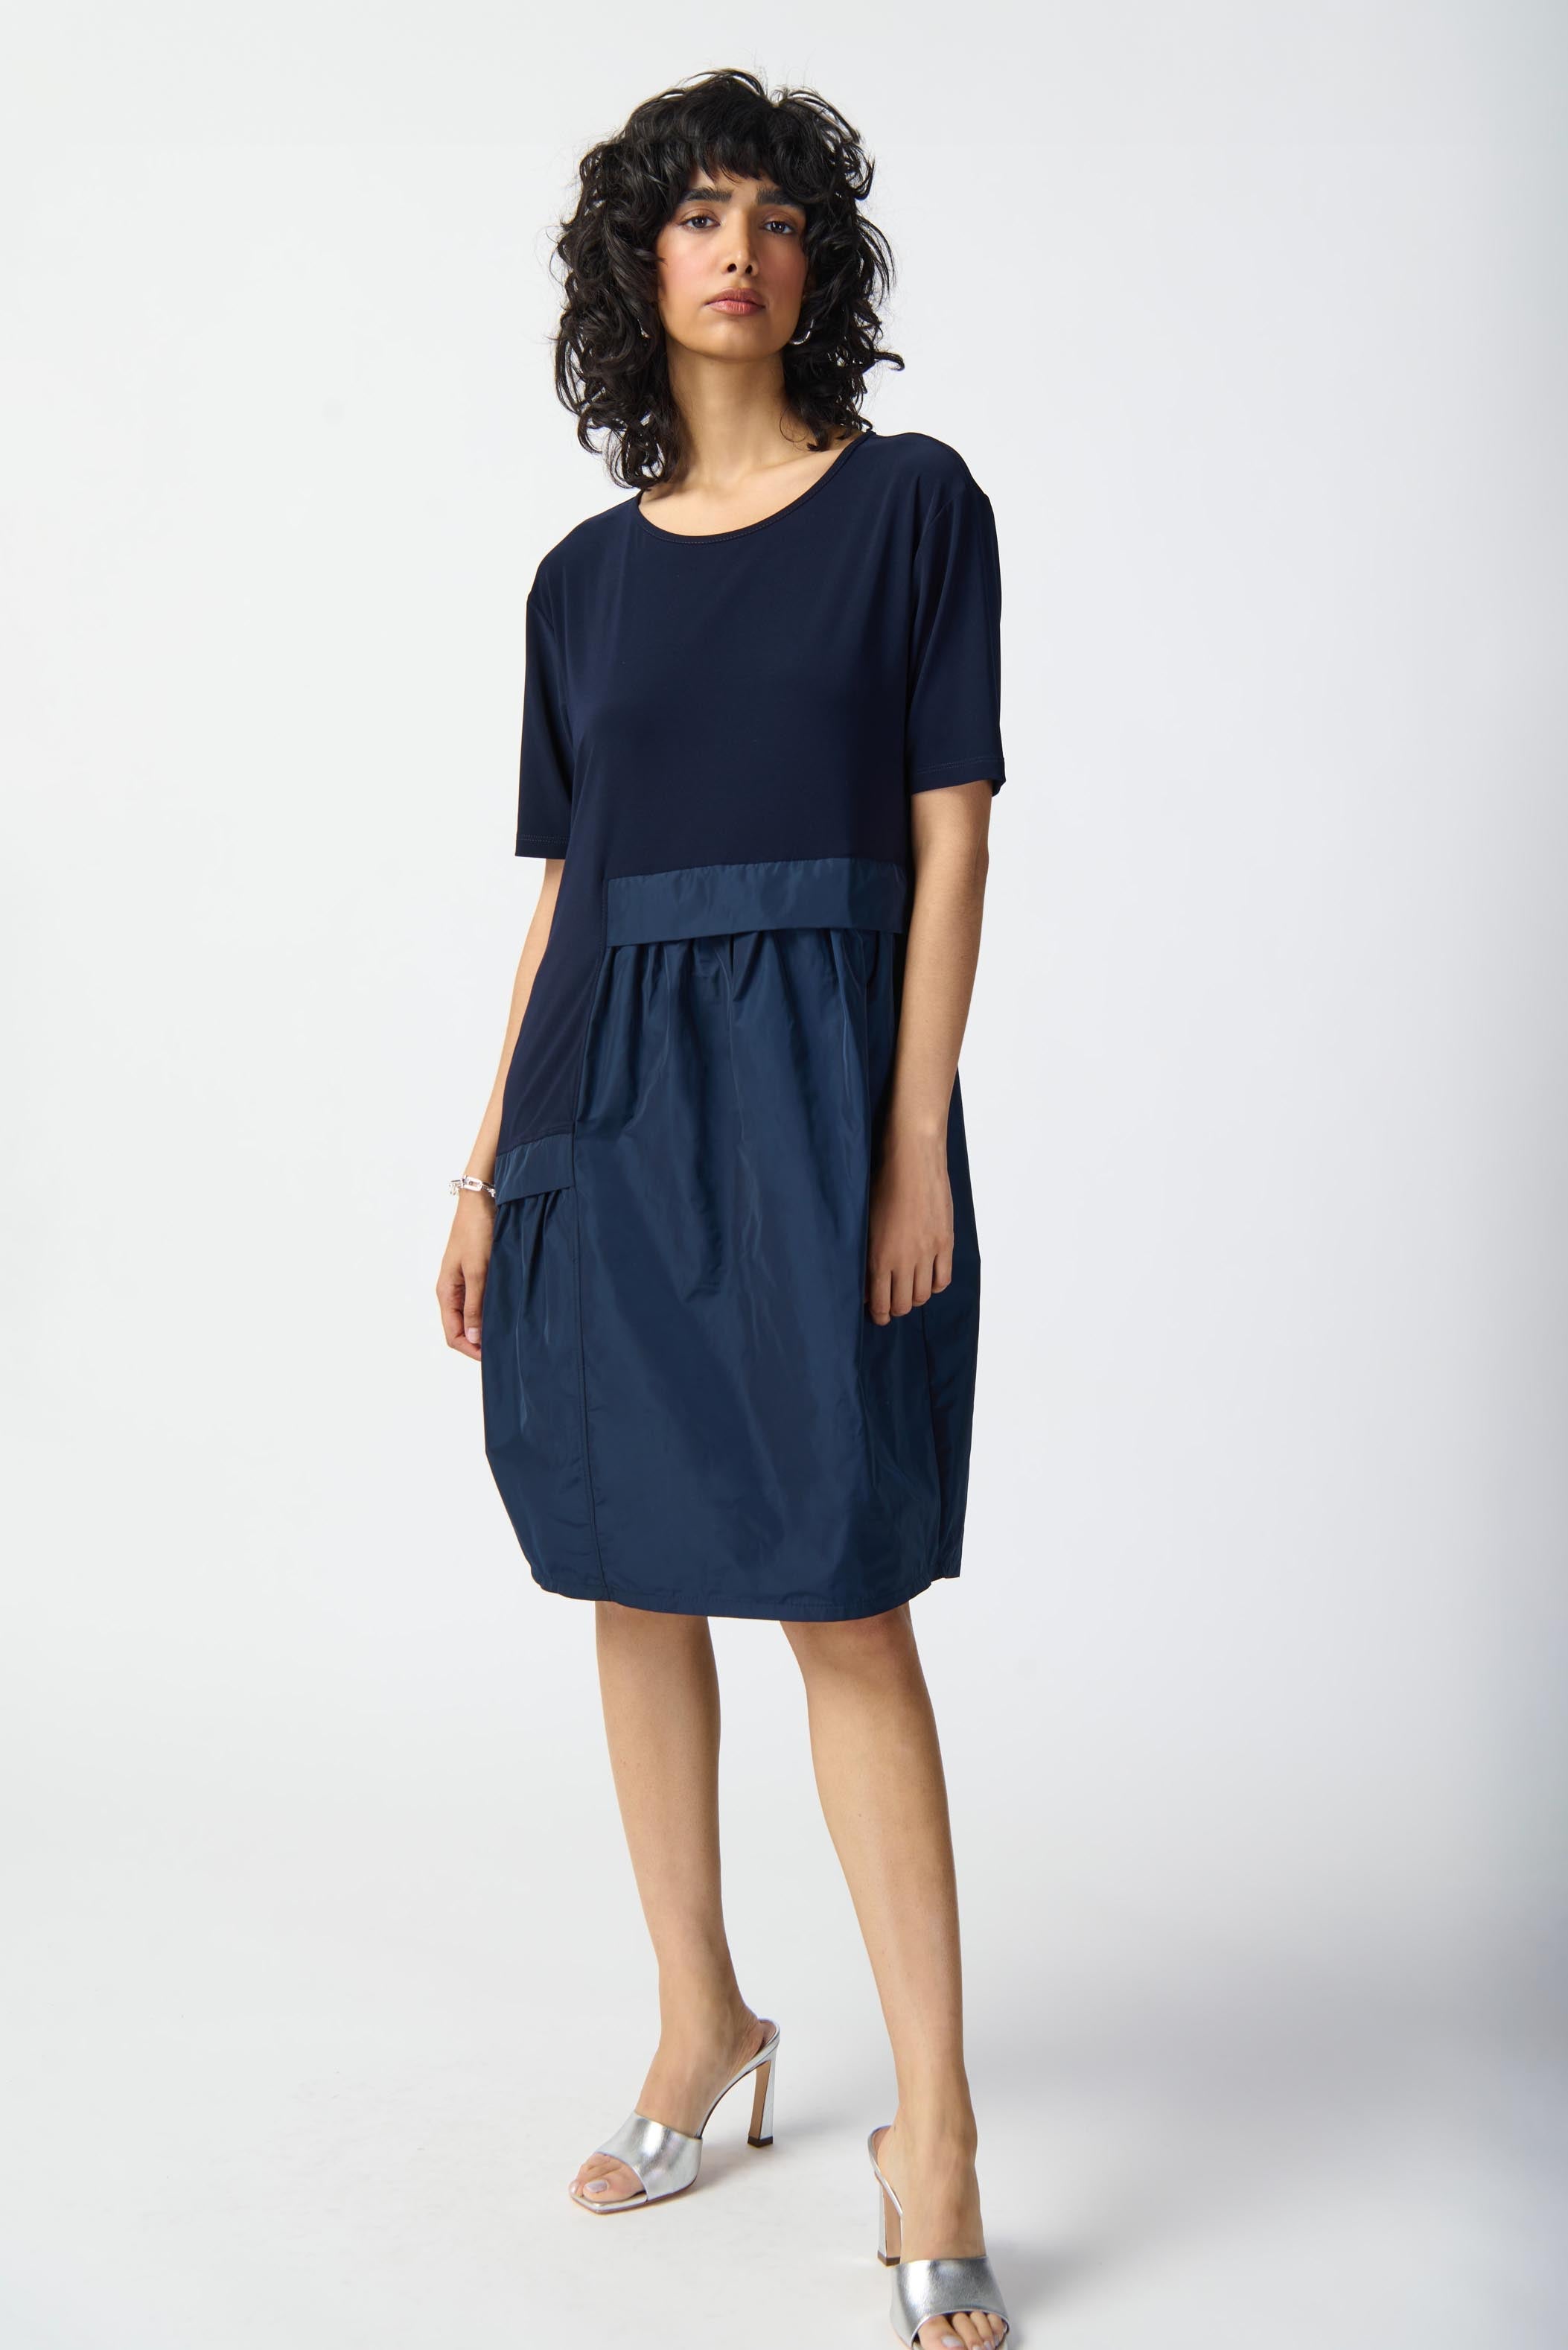 Front view of Joseph Ribkoff (241049) Women's Short Sleeve Mixed Media Cocoon Dress - Knee Length in Midnight Navy Blue